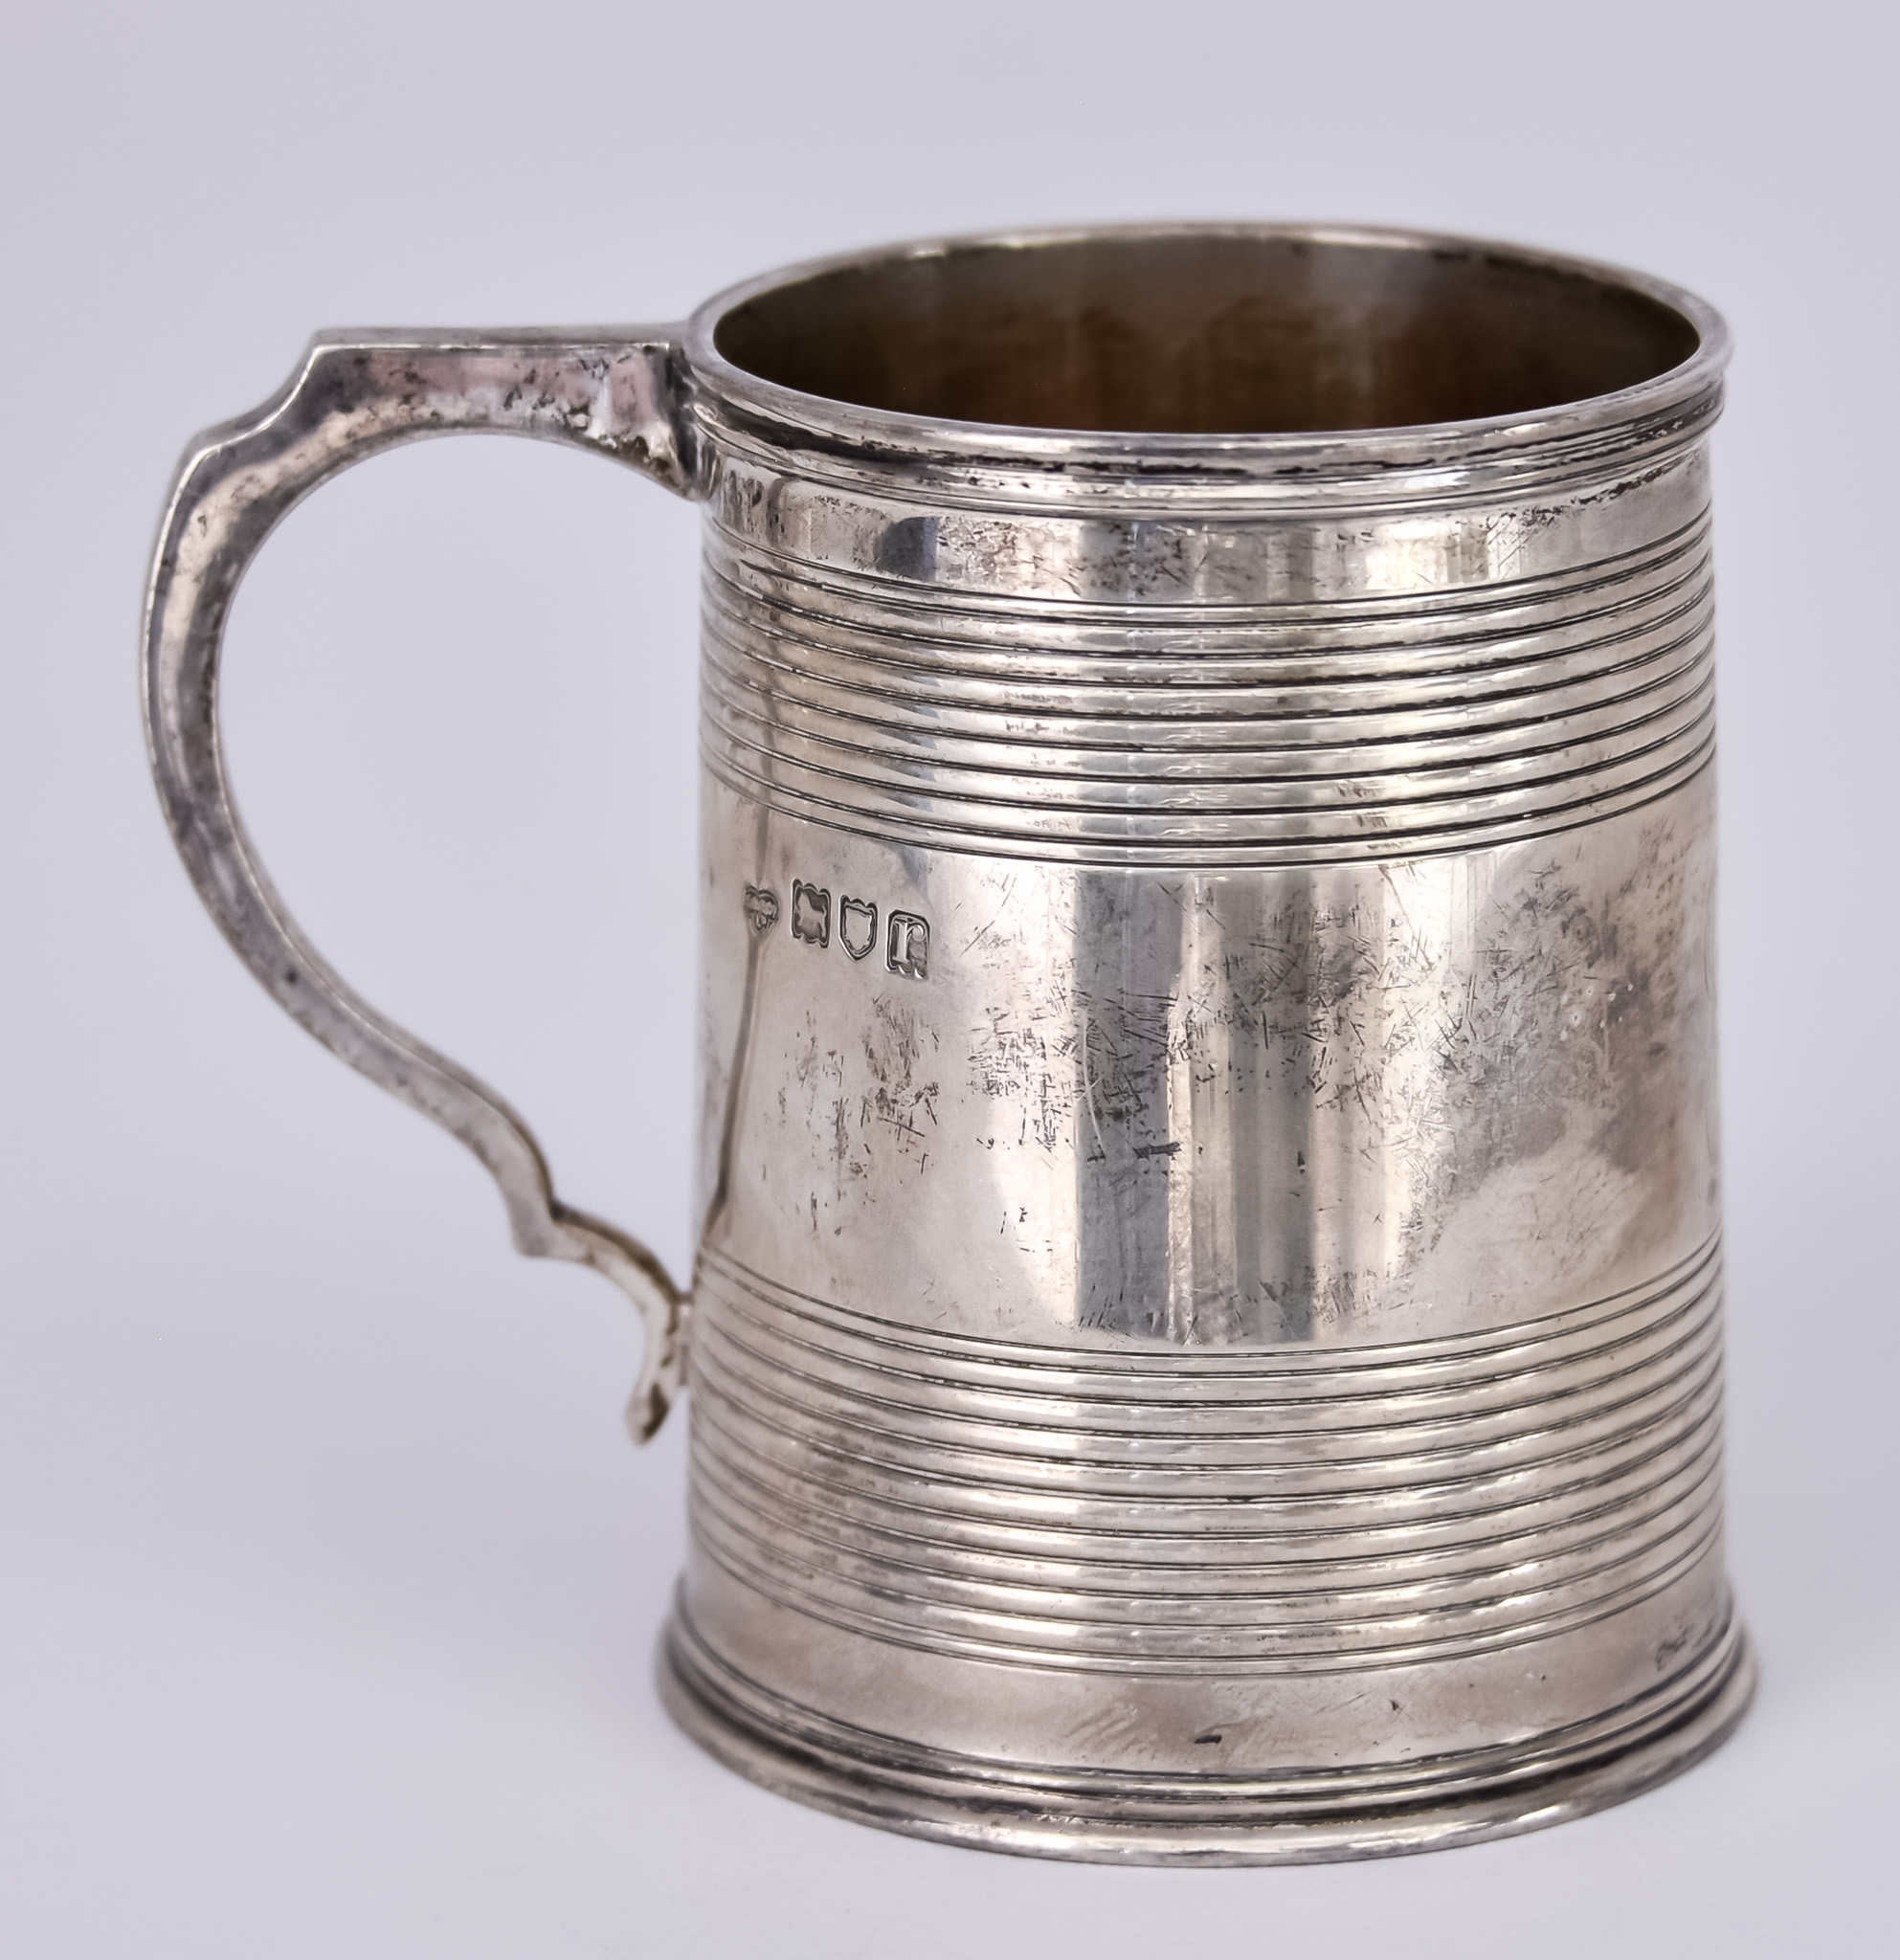 A George V Silver Christening Mug, by The Goldsmith's & Silversmith's Co. Ltd. London 1912, with